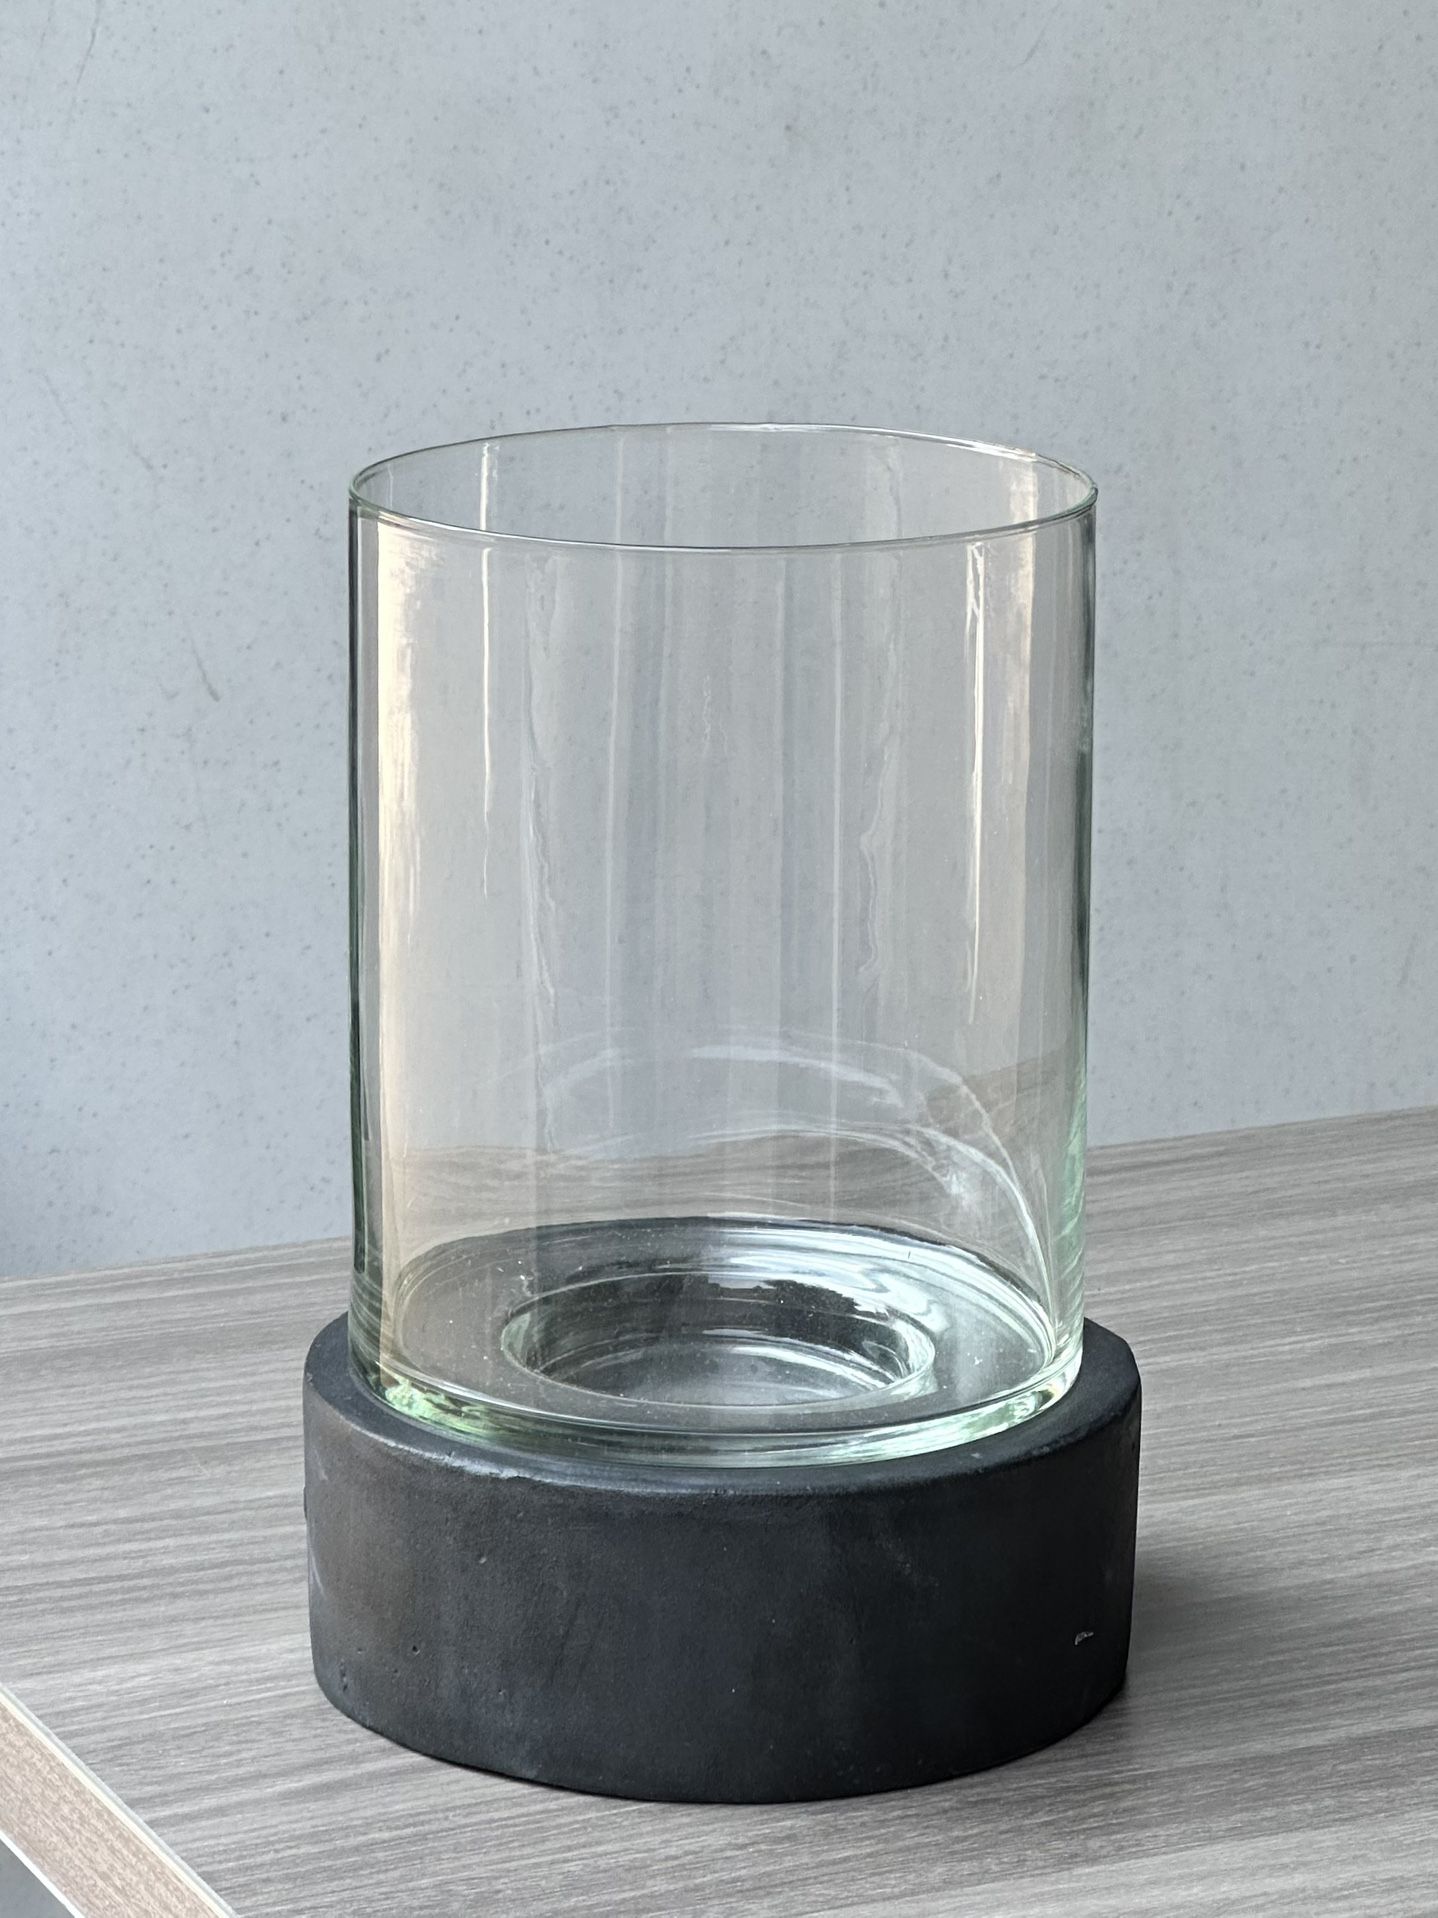 Crestview Glass/Concrete Candle Holder